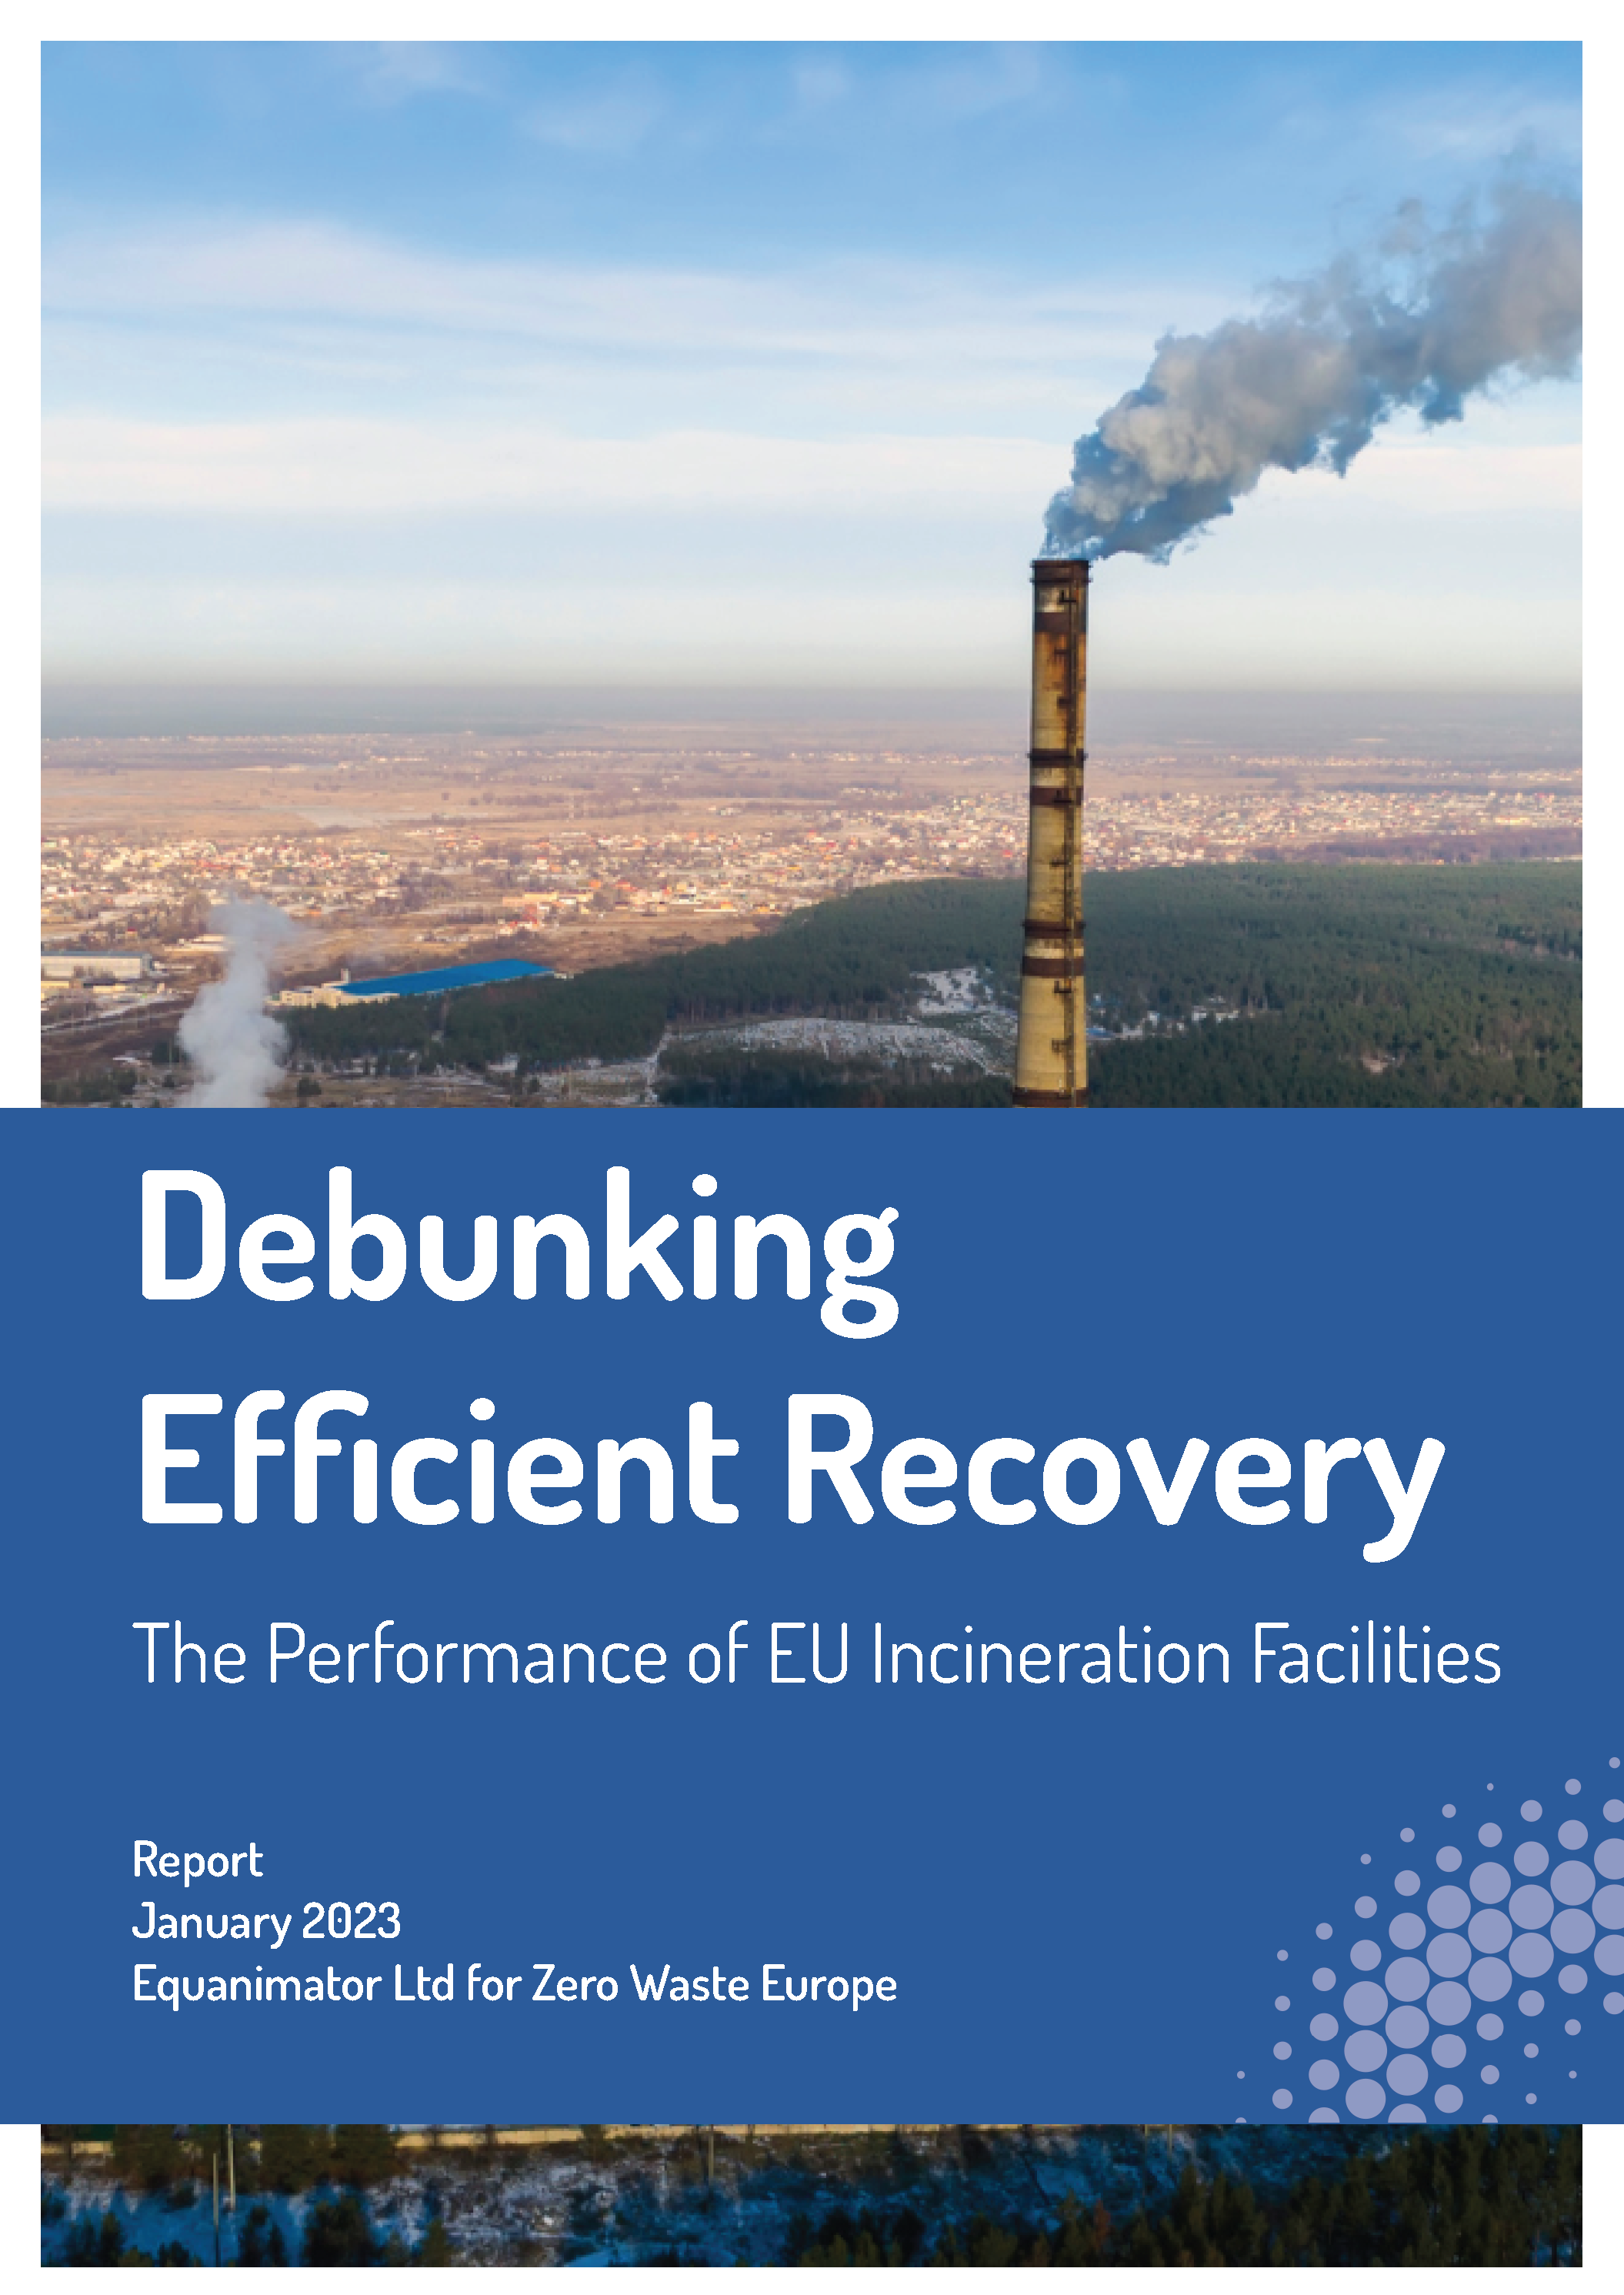 Debunking Efficient Recovery: The Performance of EU Incineration Facilities